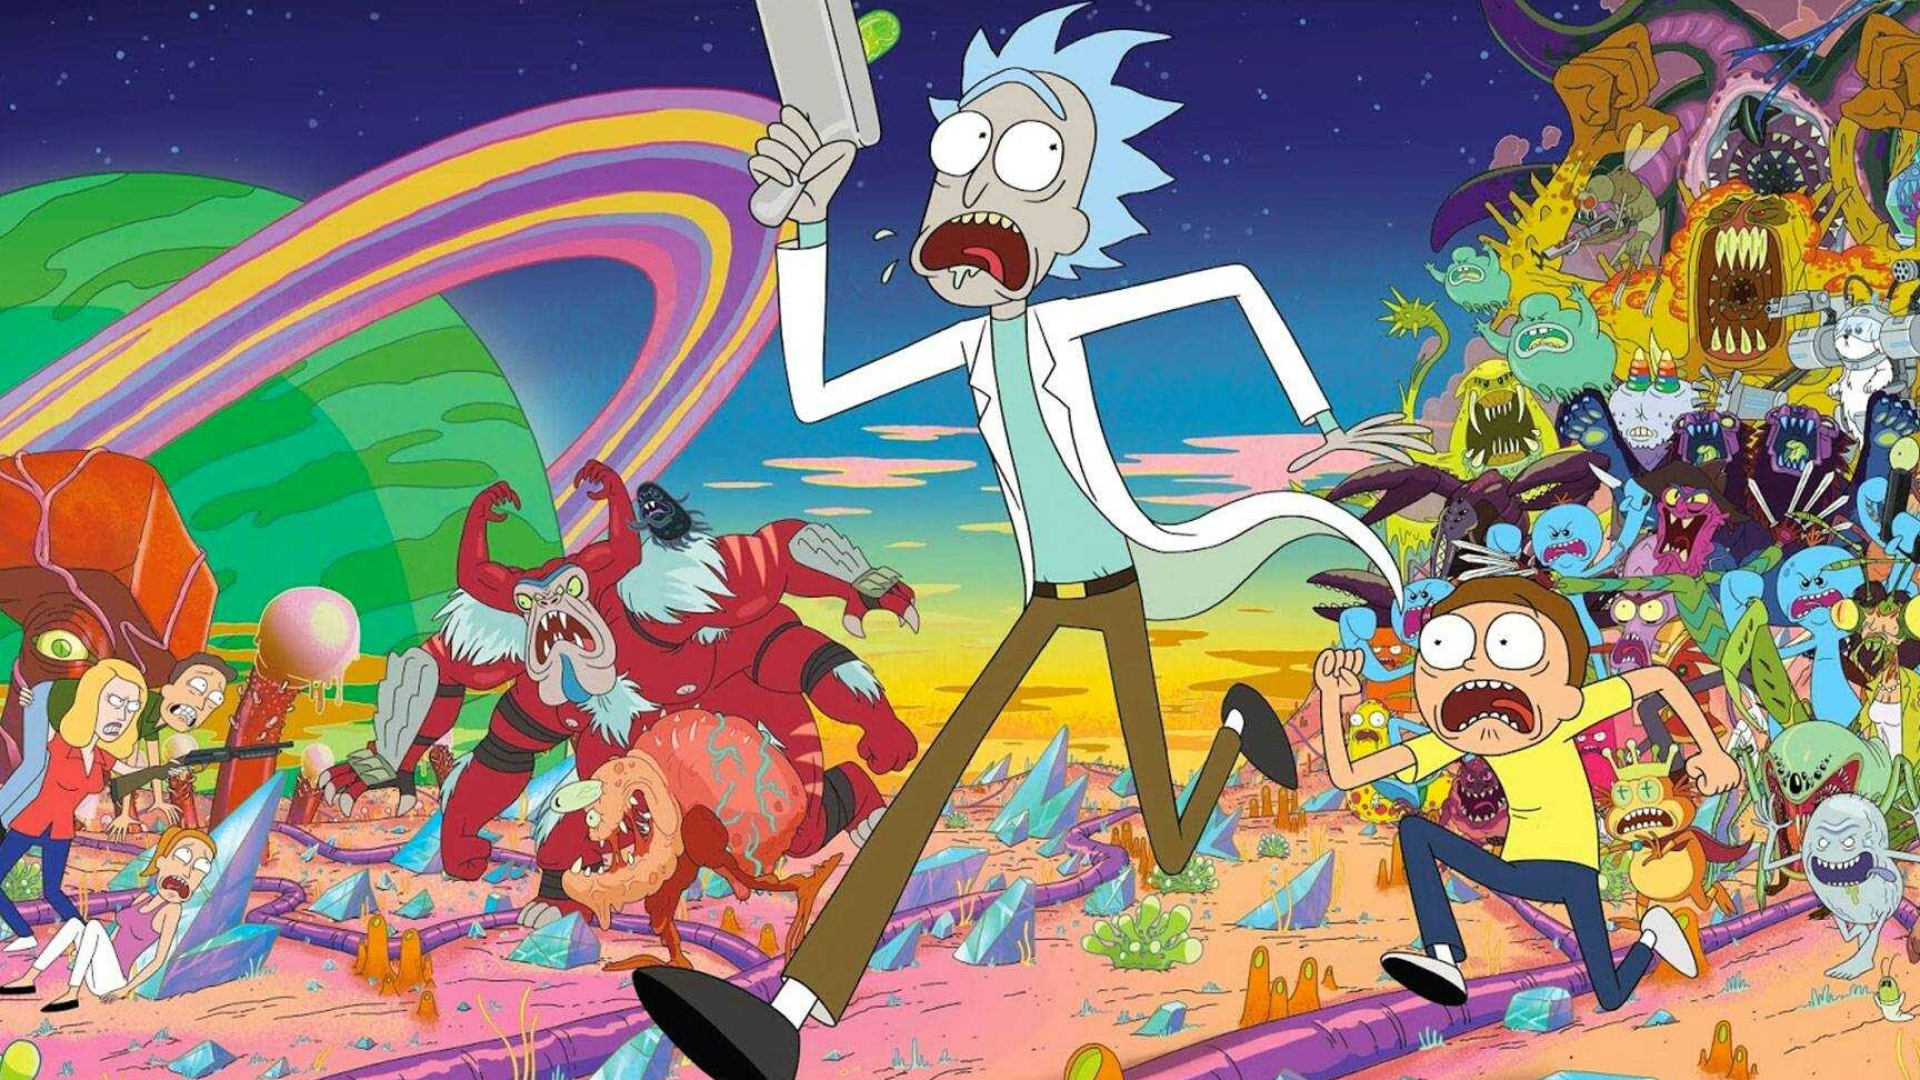 Rick and Morty: Won Primetime Emmy Awards for Outstanding Animated Program in 2018 and 2020. 1920x1080 Full HD Wallpaper.